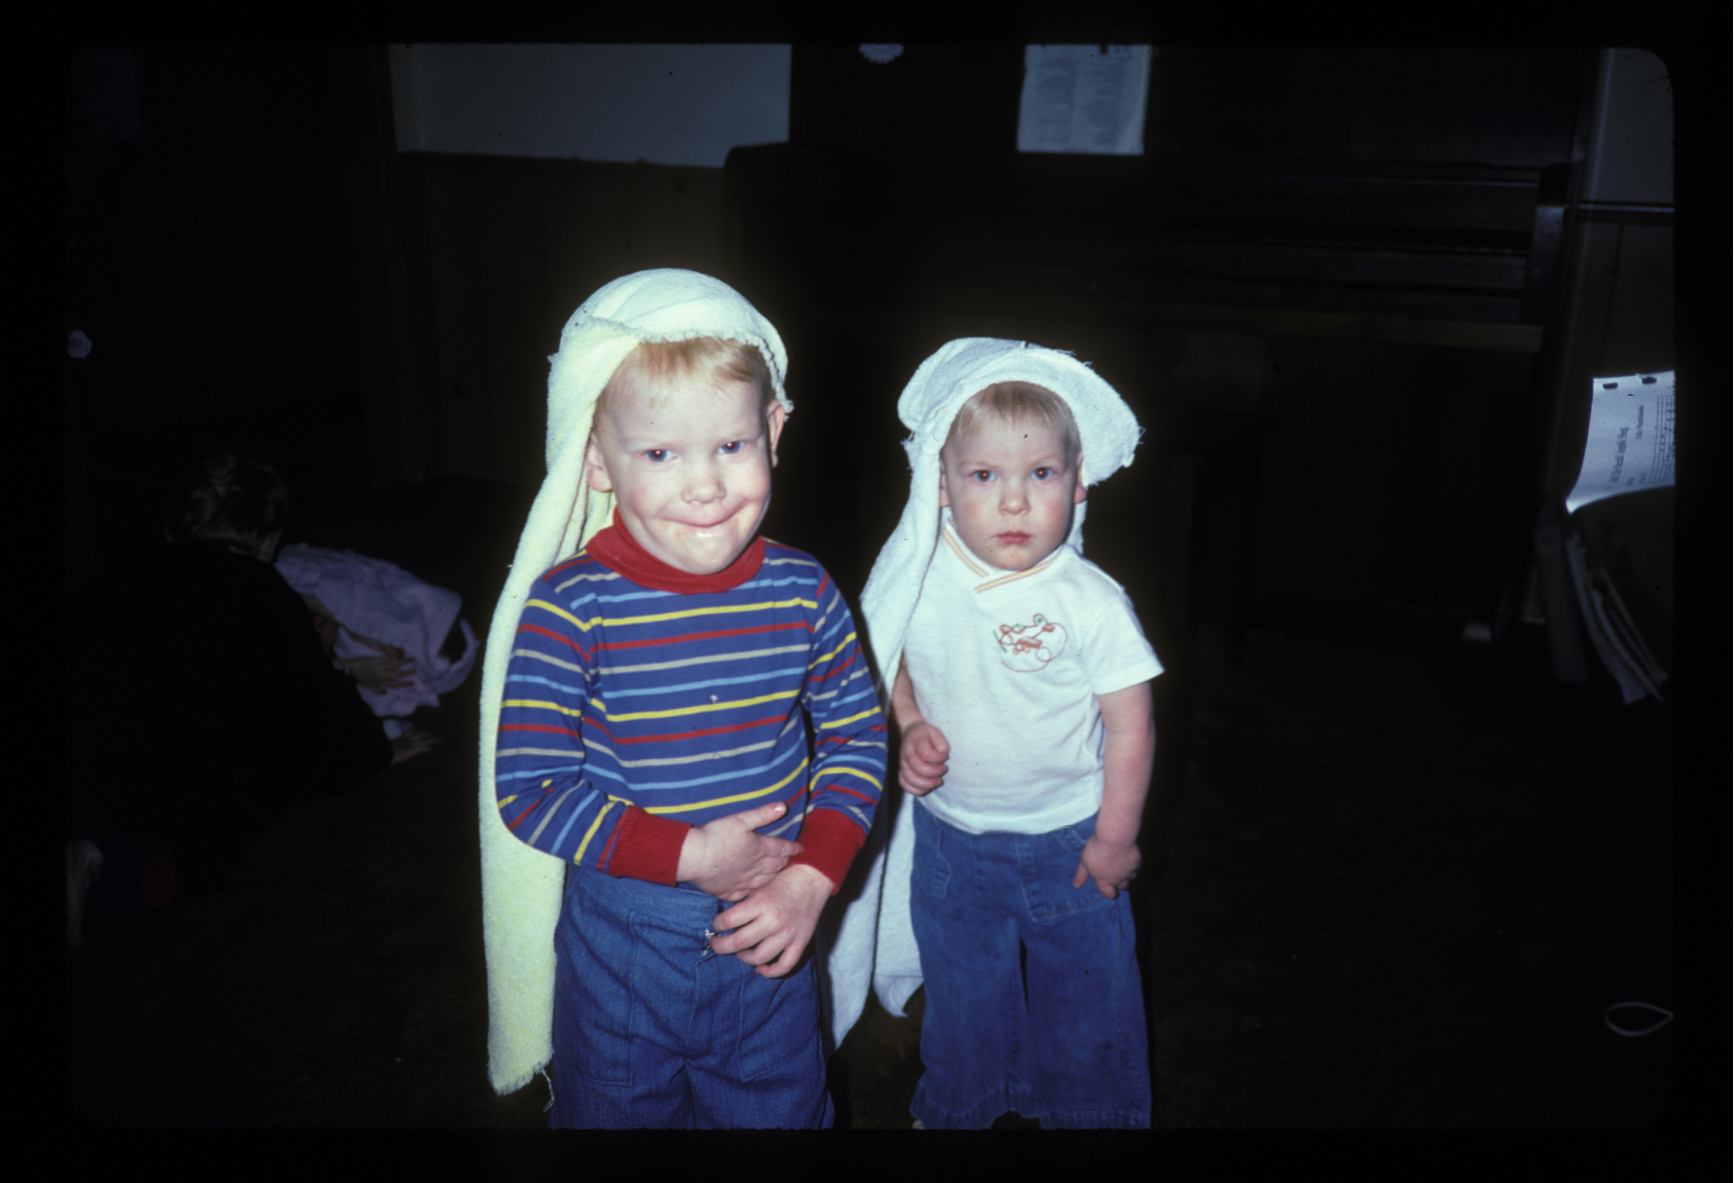 Image: Boys with towels on their heads